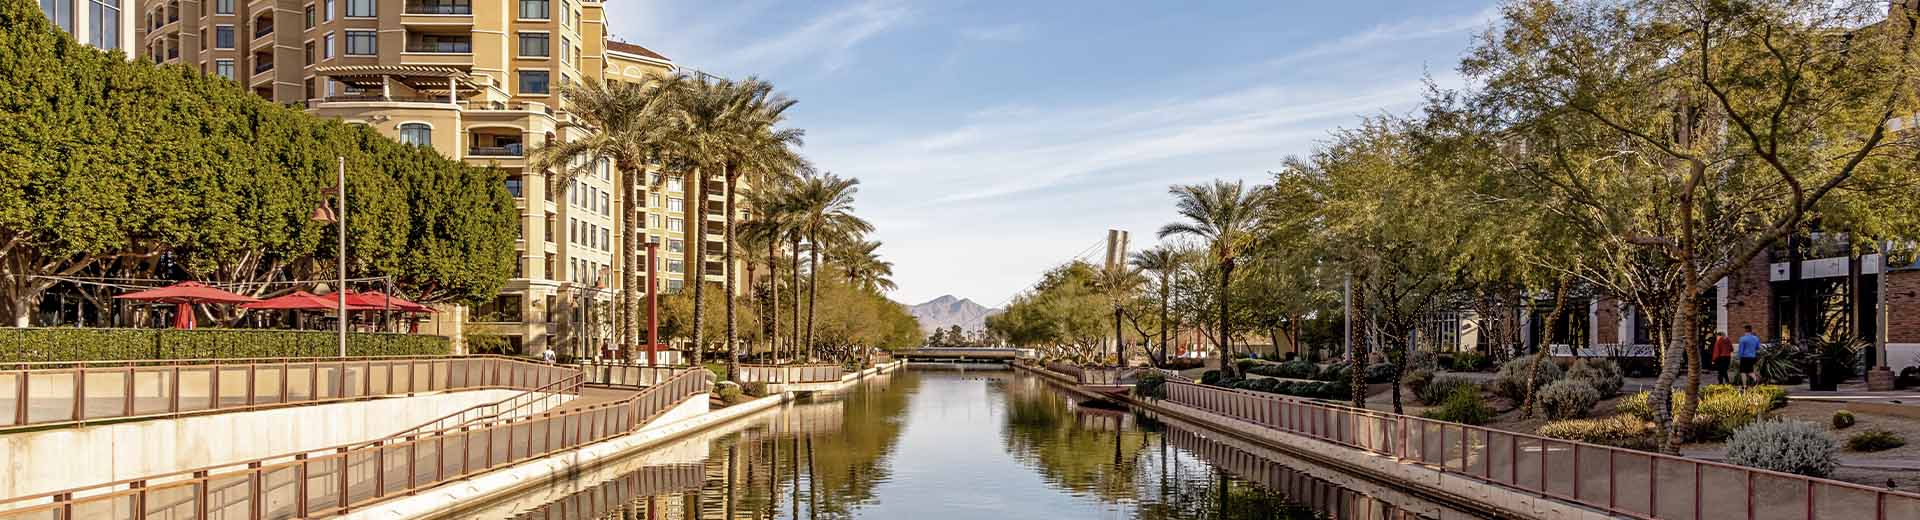 A waterway in Scottsdale on a clear summer's day, lined by low-rise residential buildings.